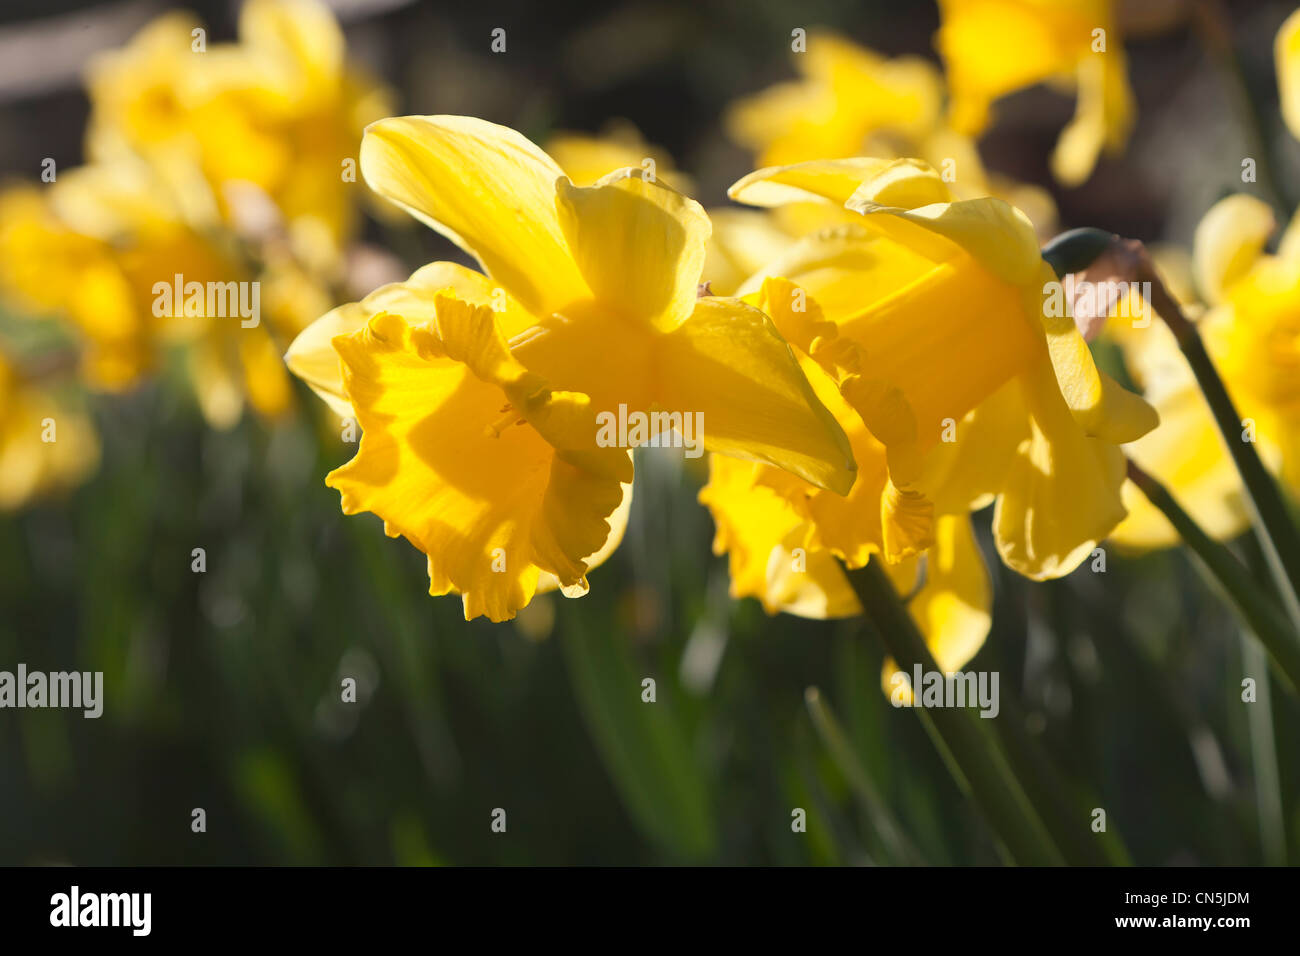 Daffodils in flower, Wales, UK Stock Photo